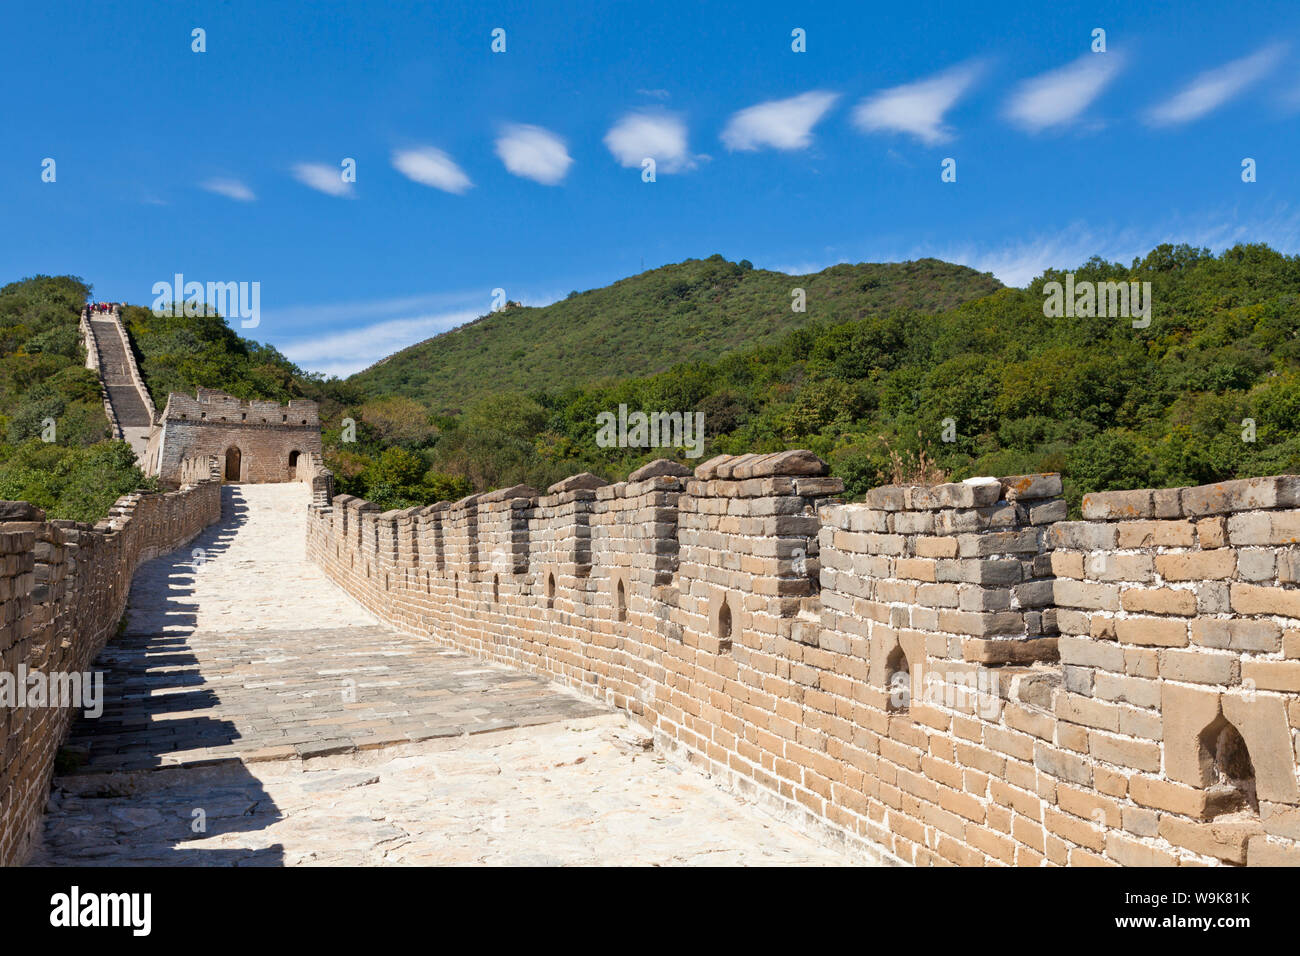 Newly restored section of the Great Wall of China, UNESCO World Heritage Site, Mutianyu, Beijing District, China, Asia Stock Photo